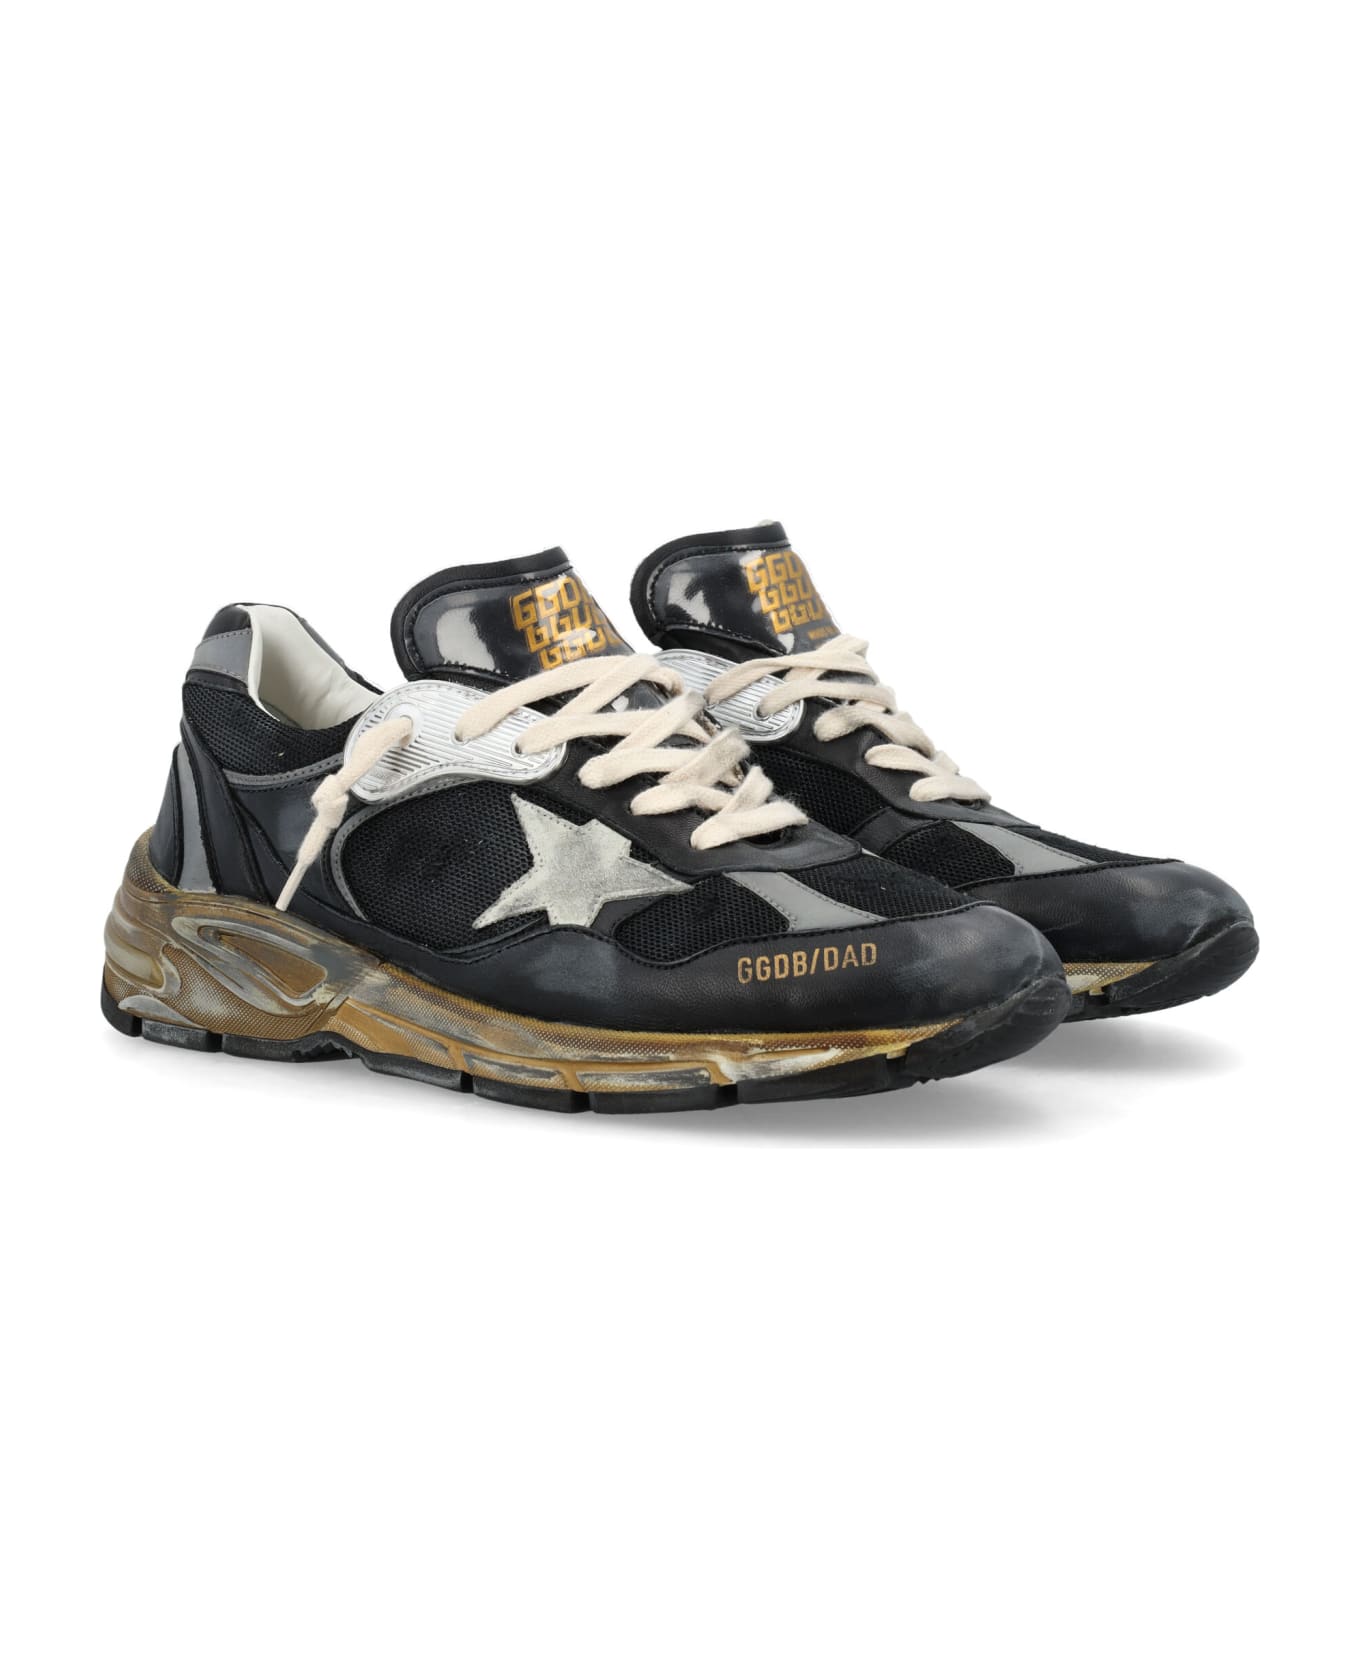 Golden Goose Dad-star Sneakers - Black/Silver/Ice スニーカー